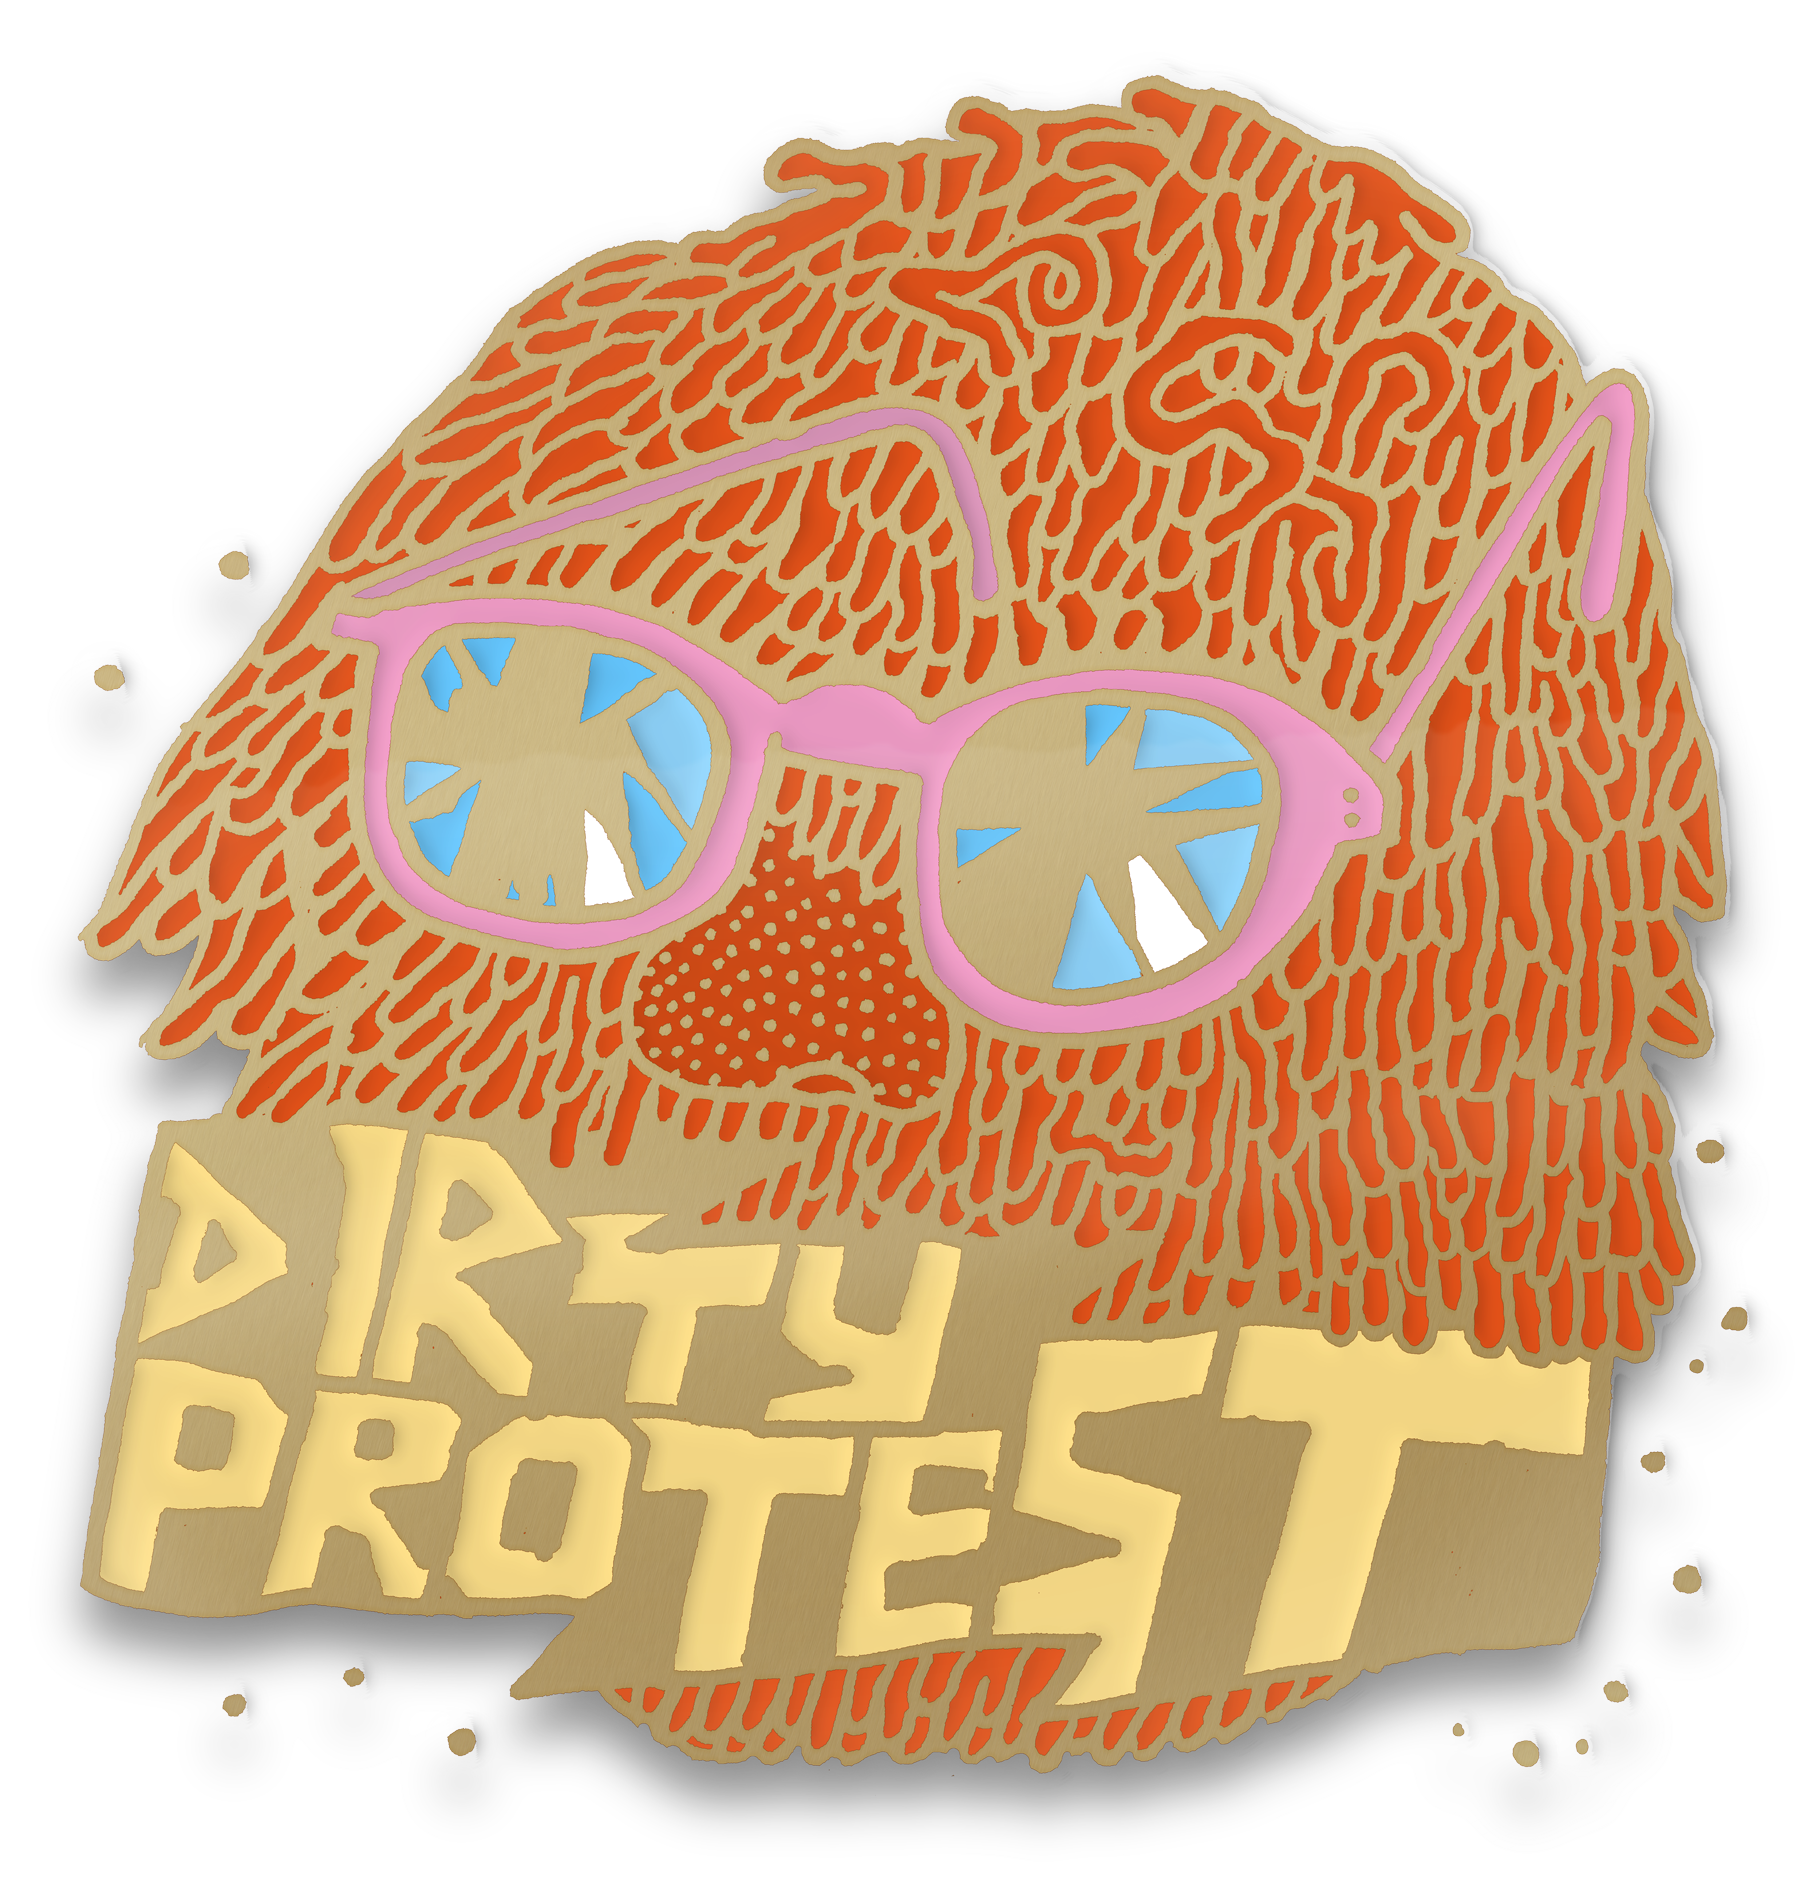 Dirty-Protest